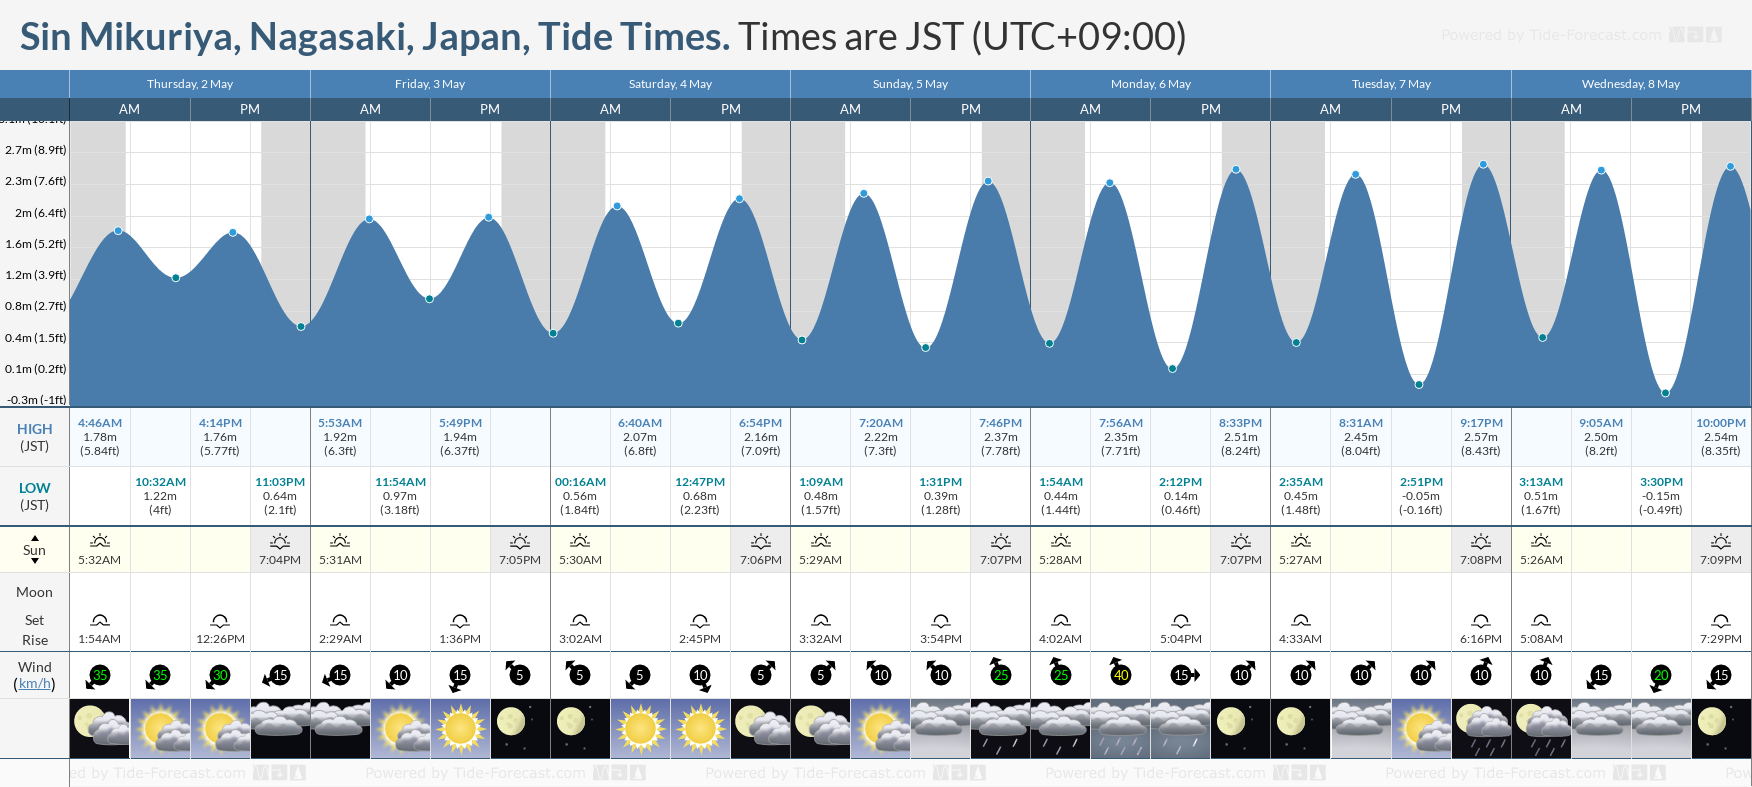 Sin Mikuriya, Nagasaki, Japan Tide Chart including high and low tide tide times for the next 7 days